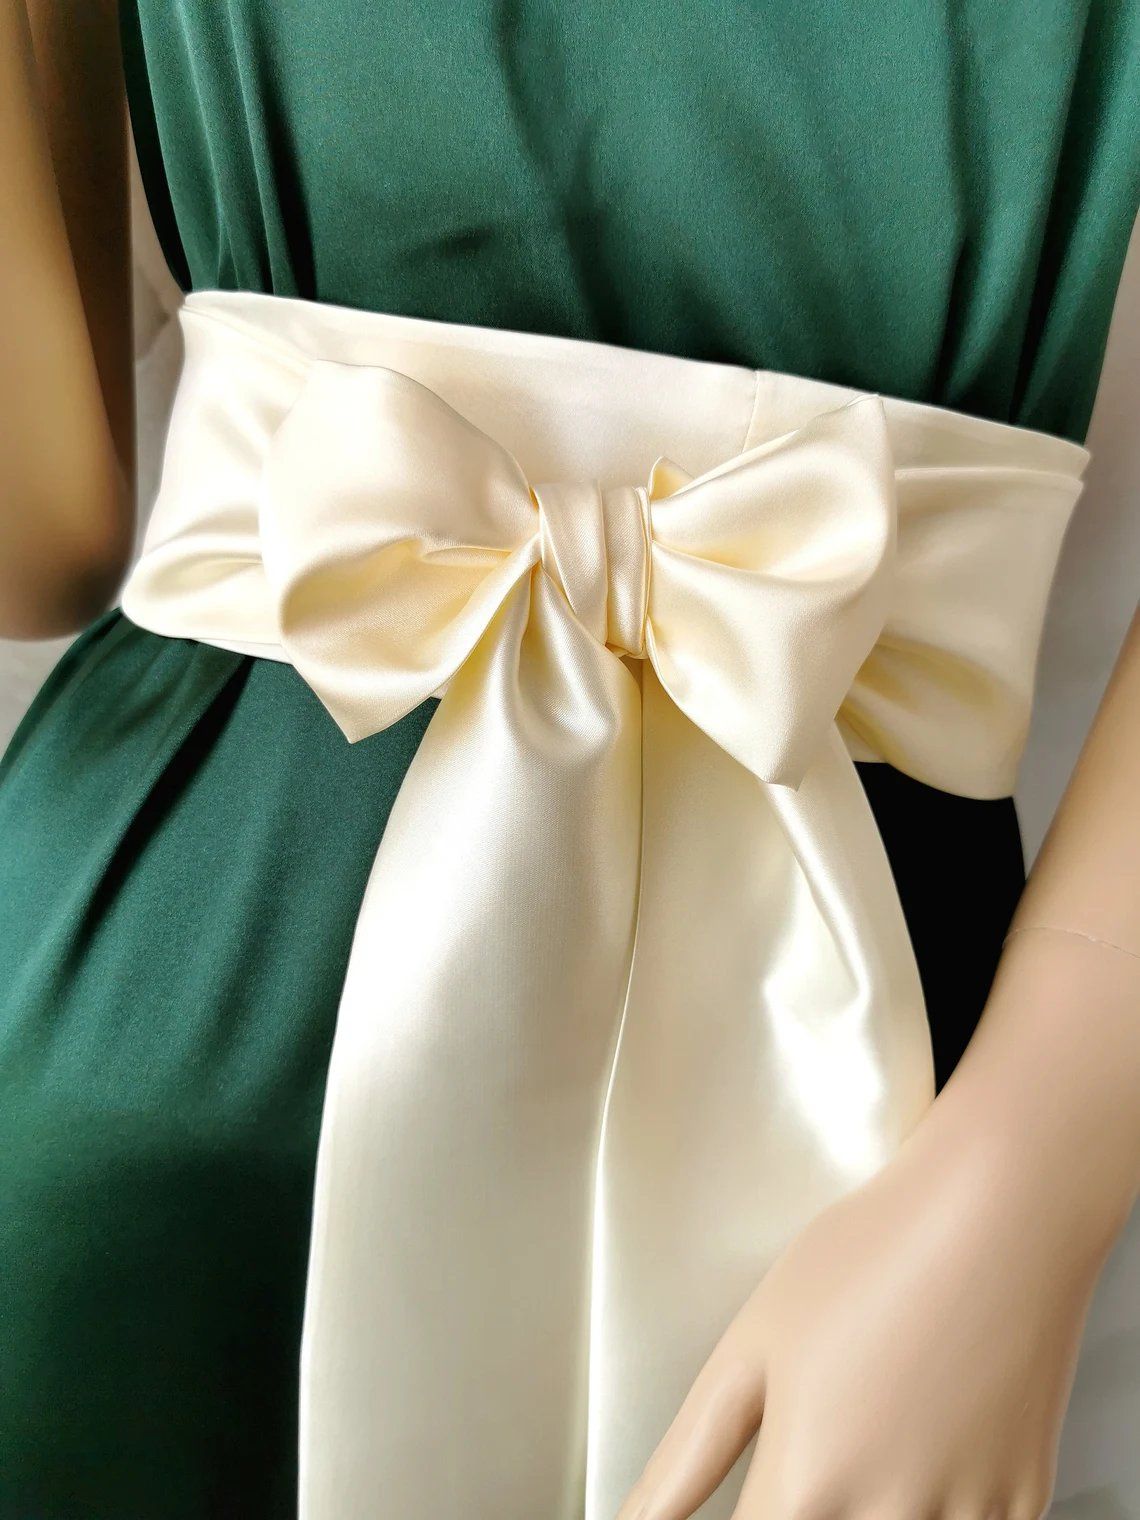 Bridal sash belt adds a touch of sophistication to dress instantly